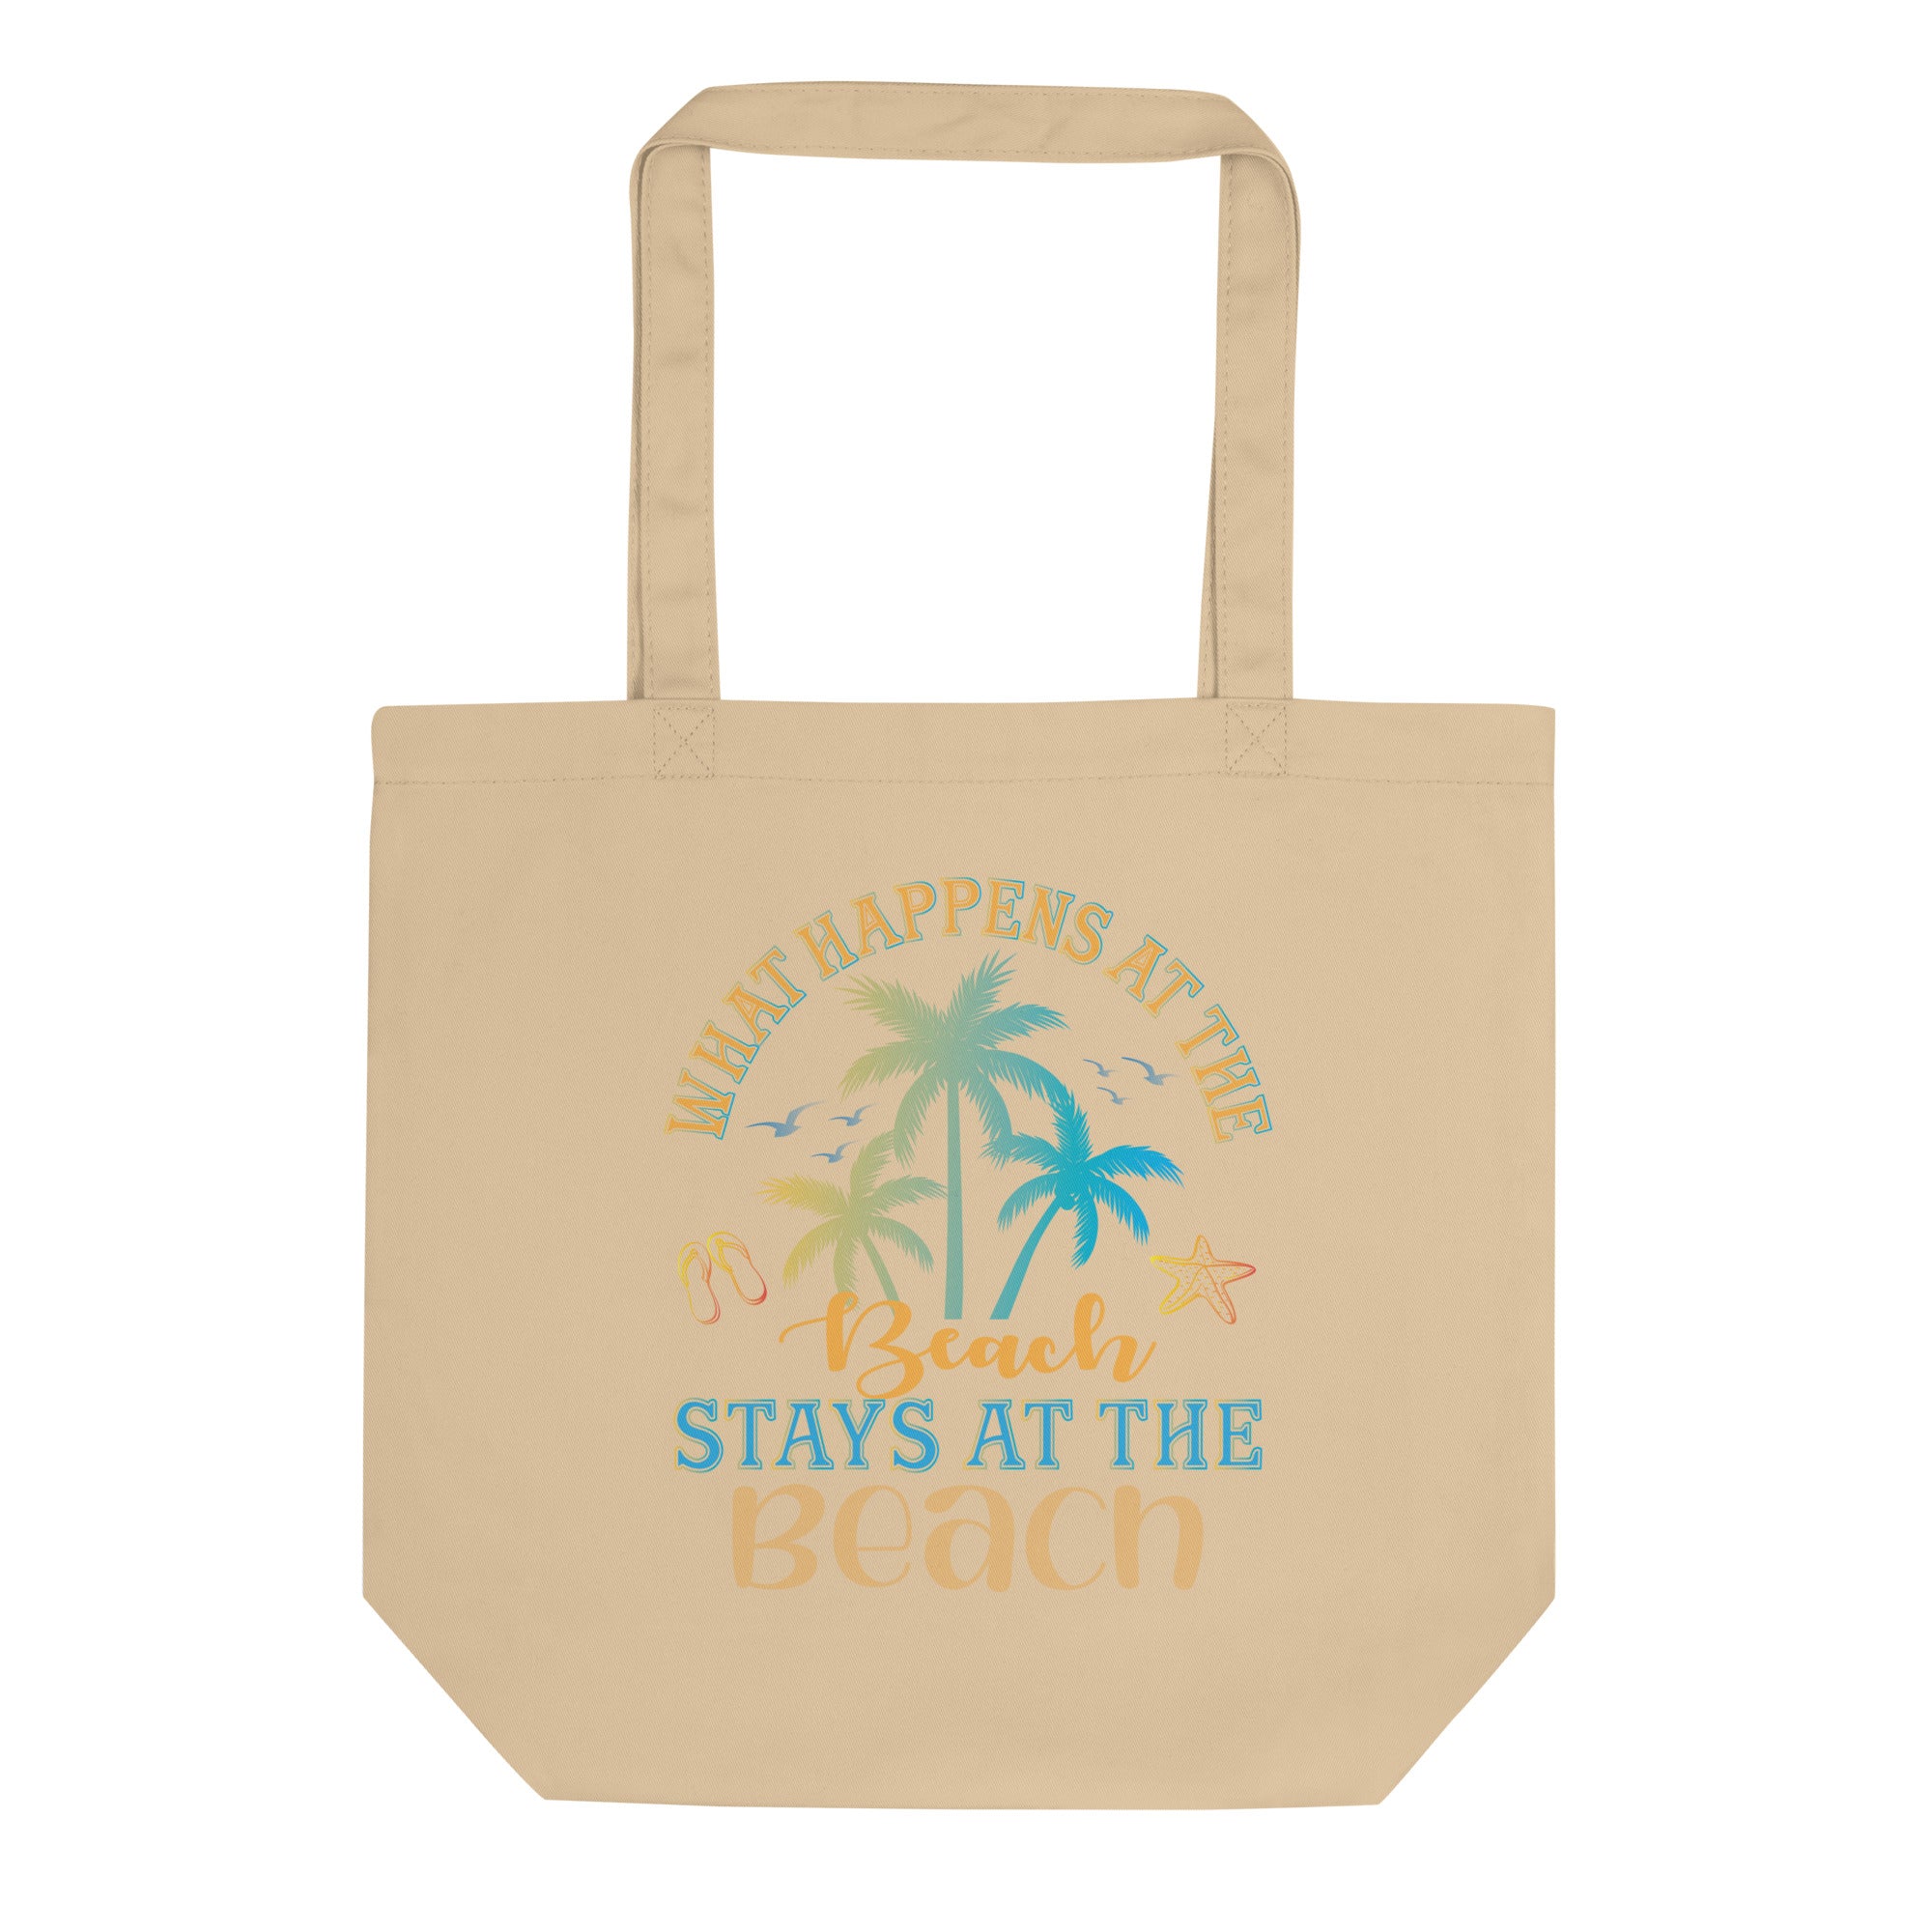 What Happens at the Beach - Tote Bag